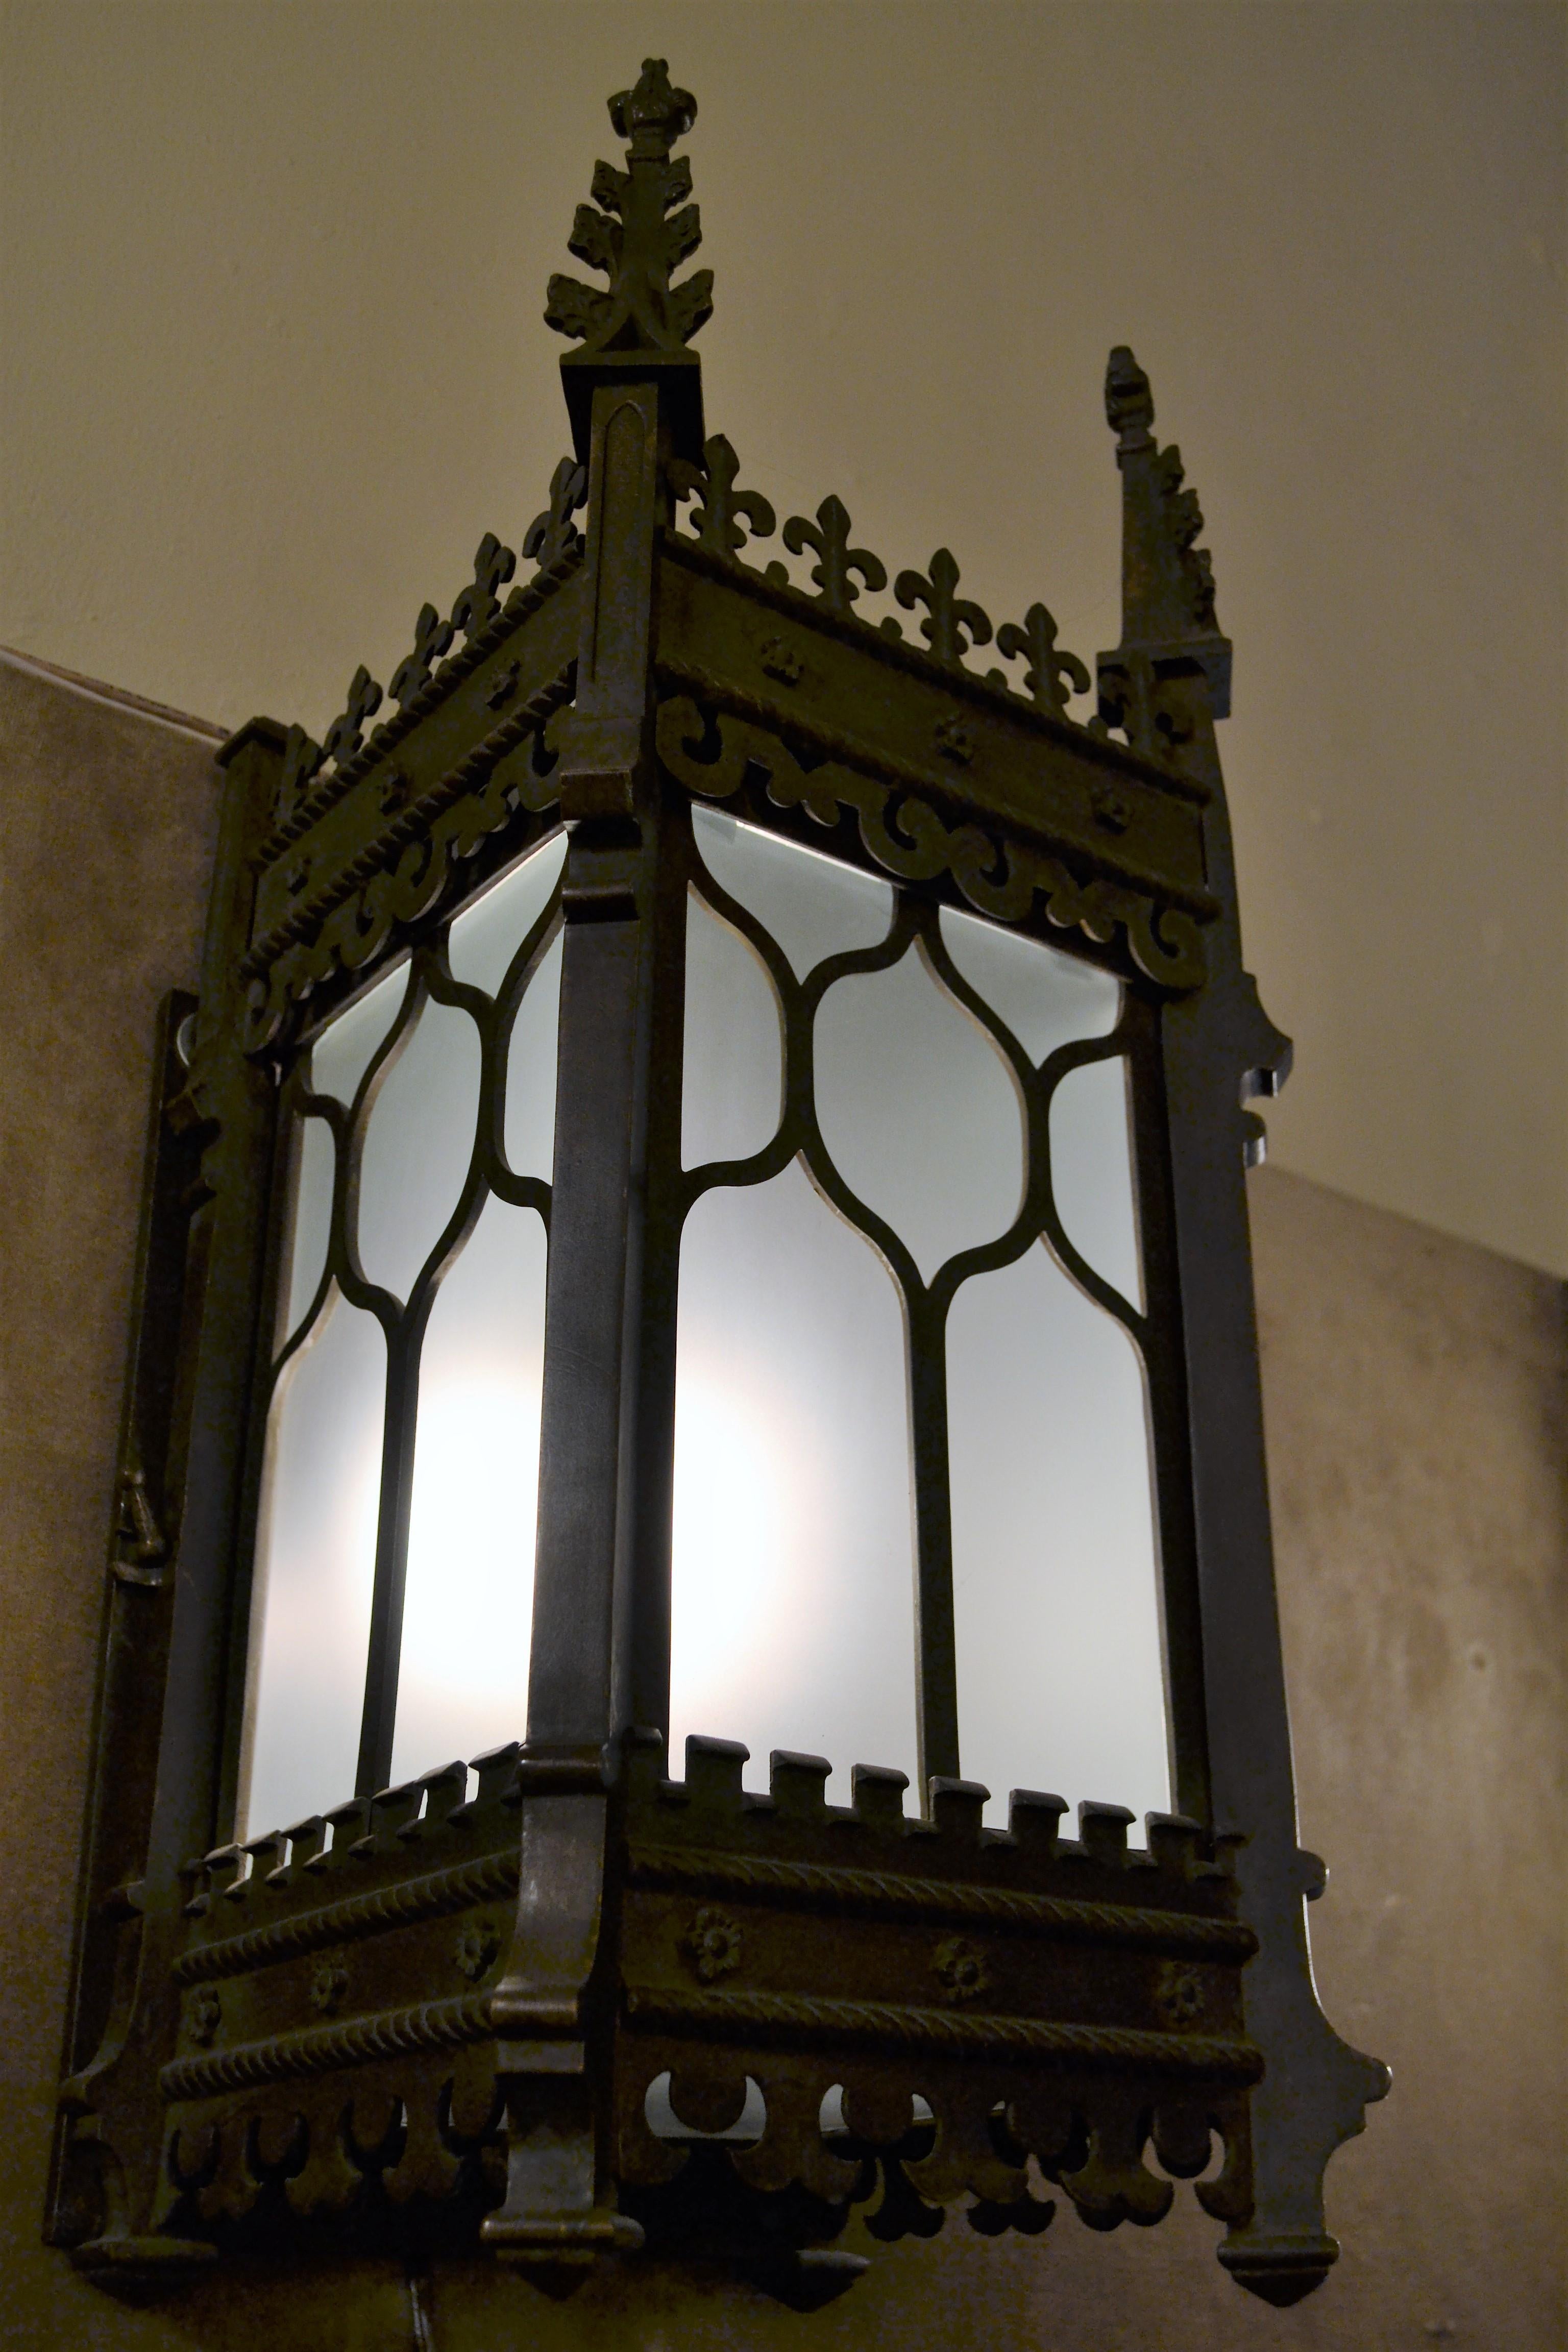 Pair of antique 19th century bronze lanterns in the Gothic style.